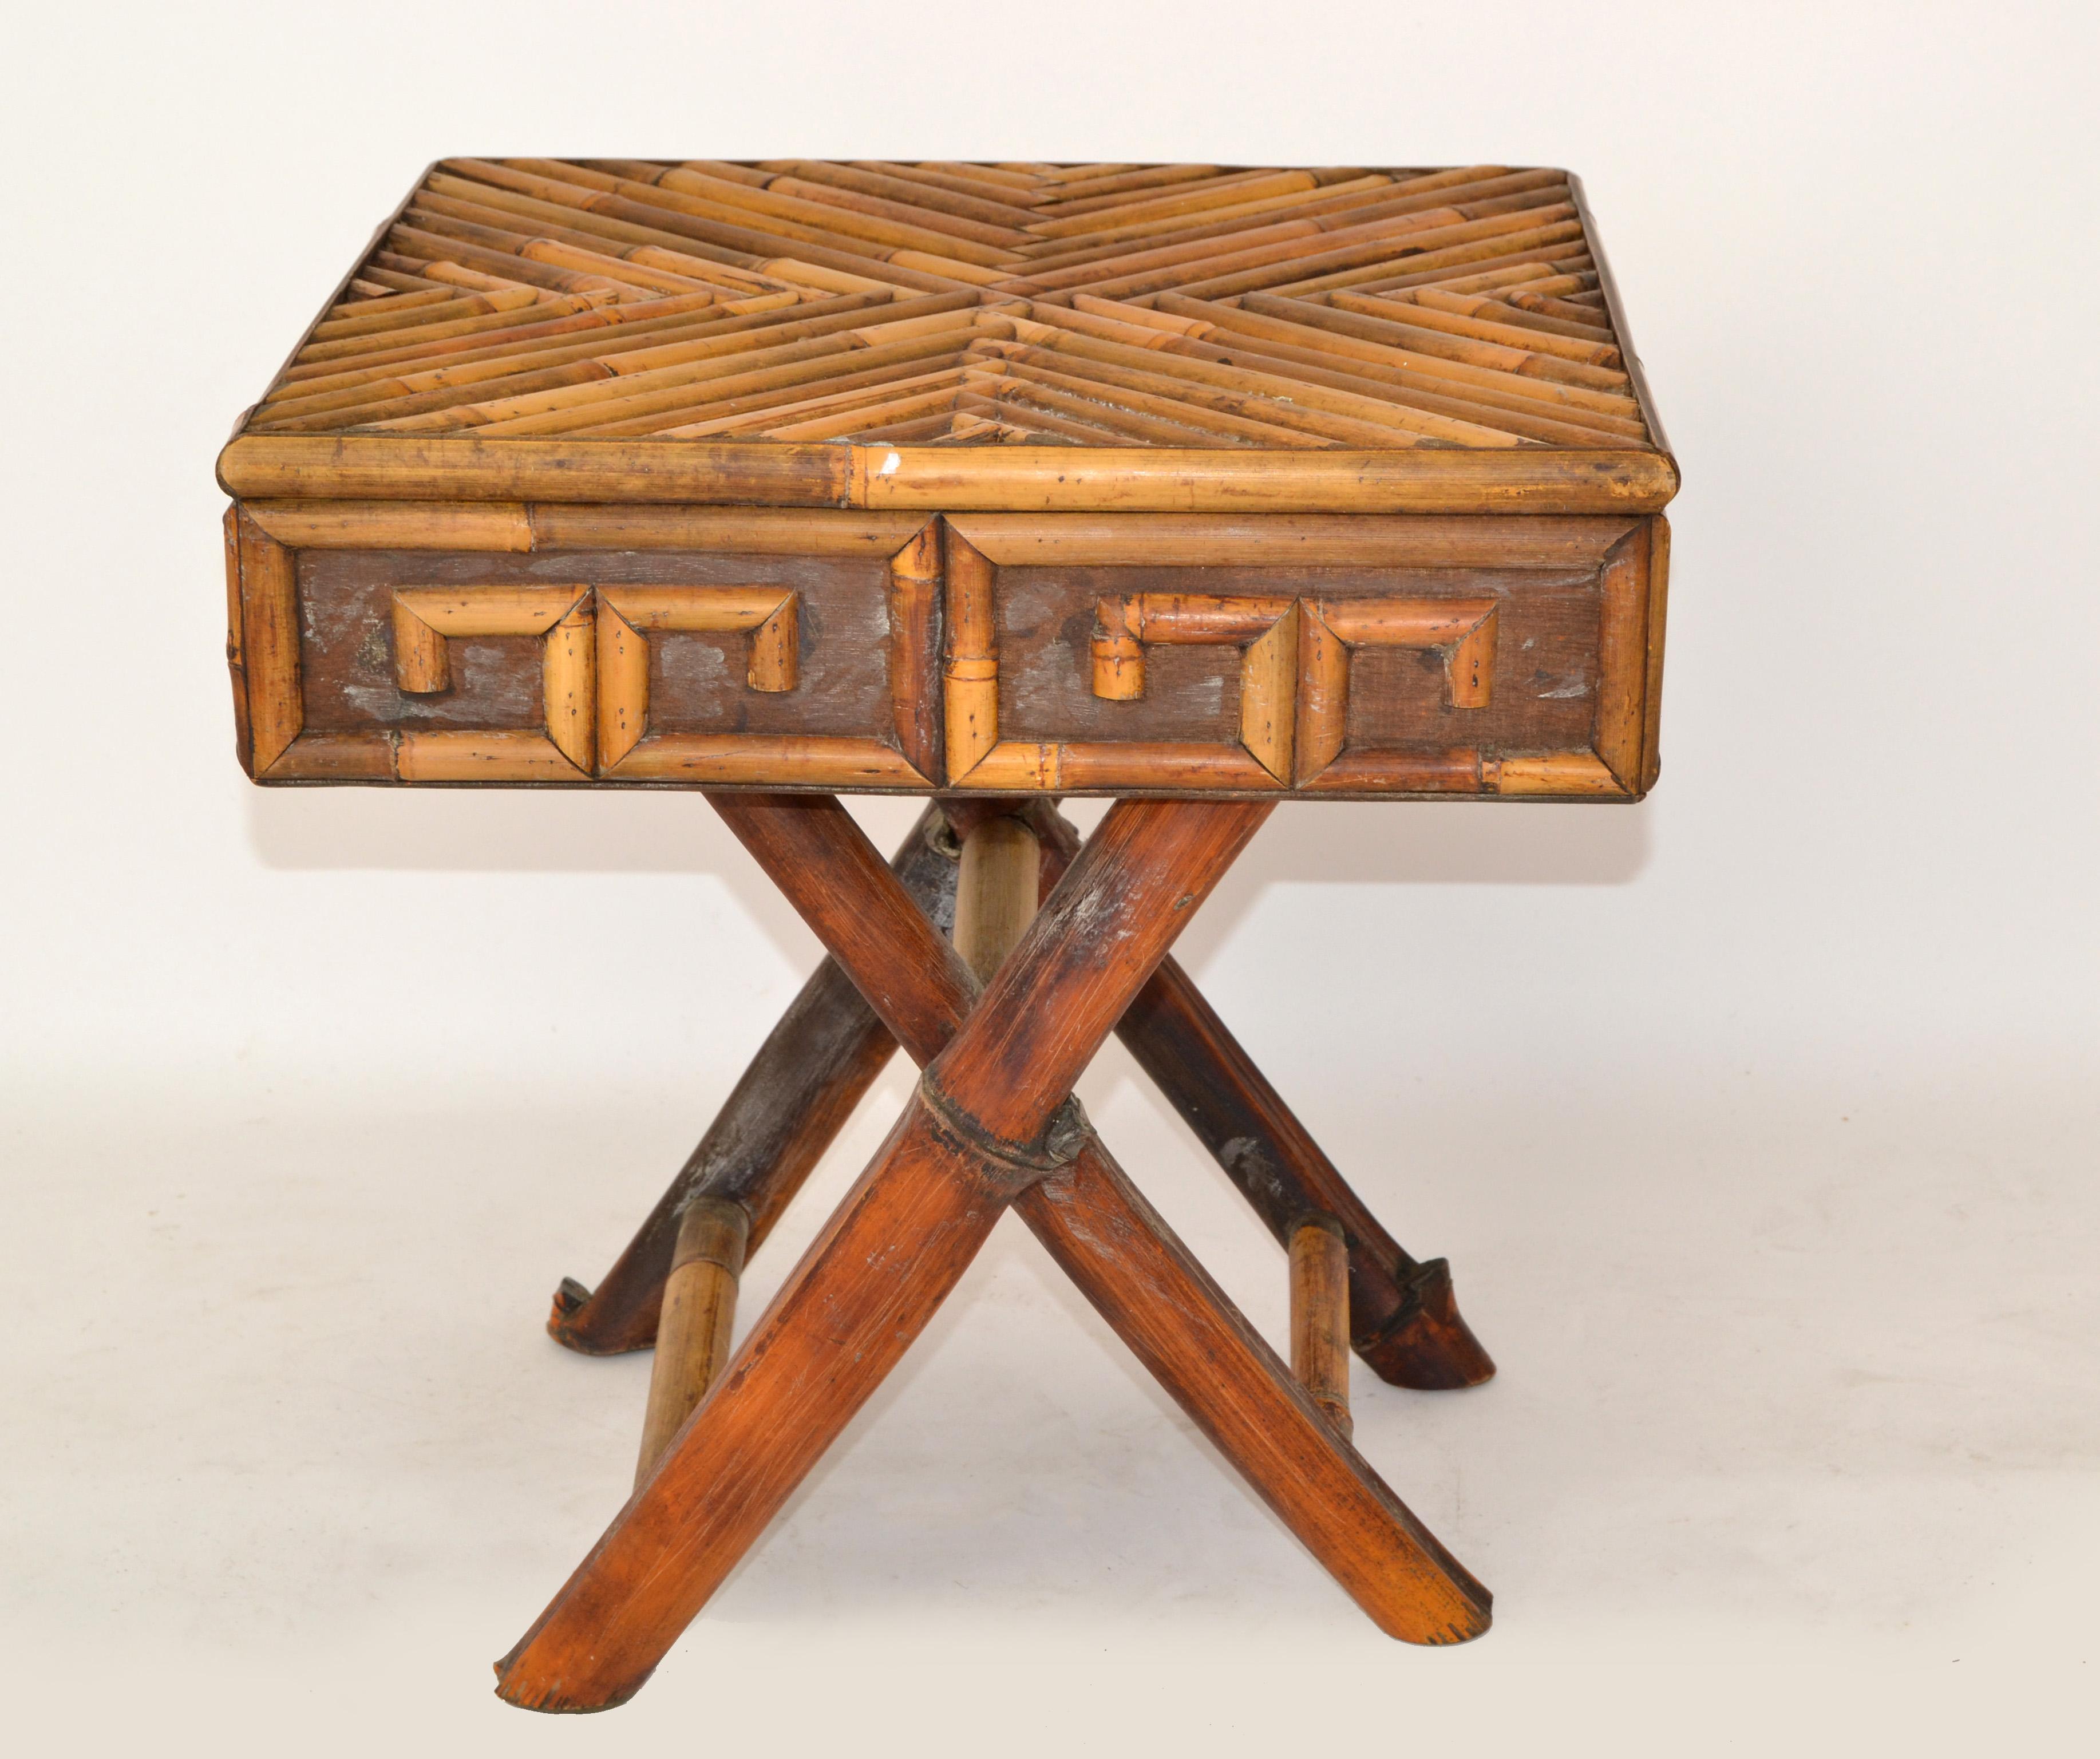 Hand-Crafted 1 Bohemian Greek Key Pattern Handcrafted Bamboo & Cane Folding Side Drink Table For Sale